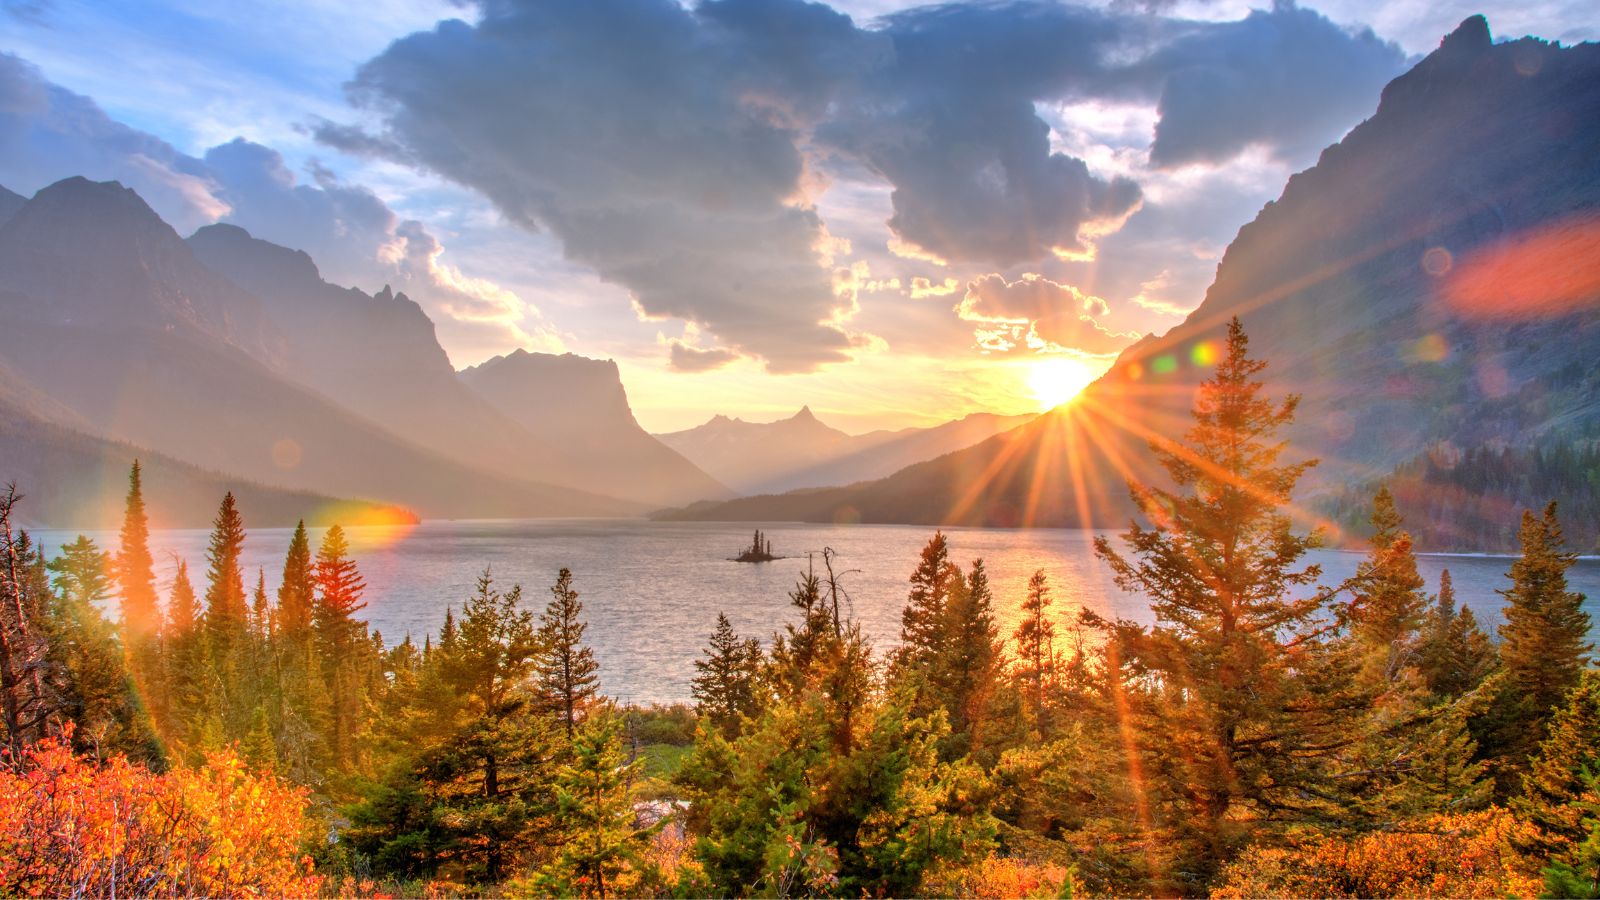 Saint Mary Lake and Wild Goose Island at Glacier National Park (Photo: Shutterstock)